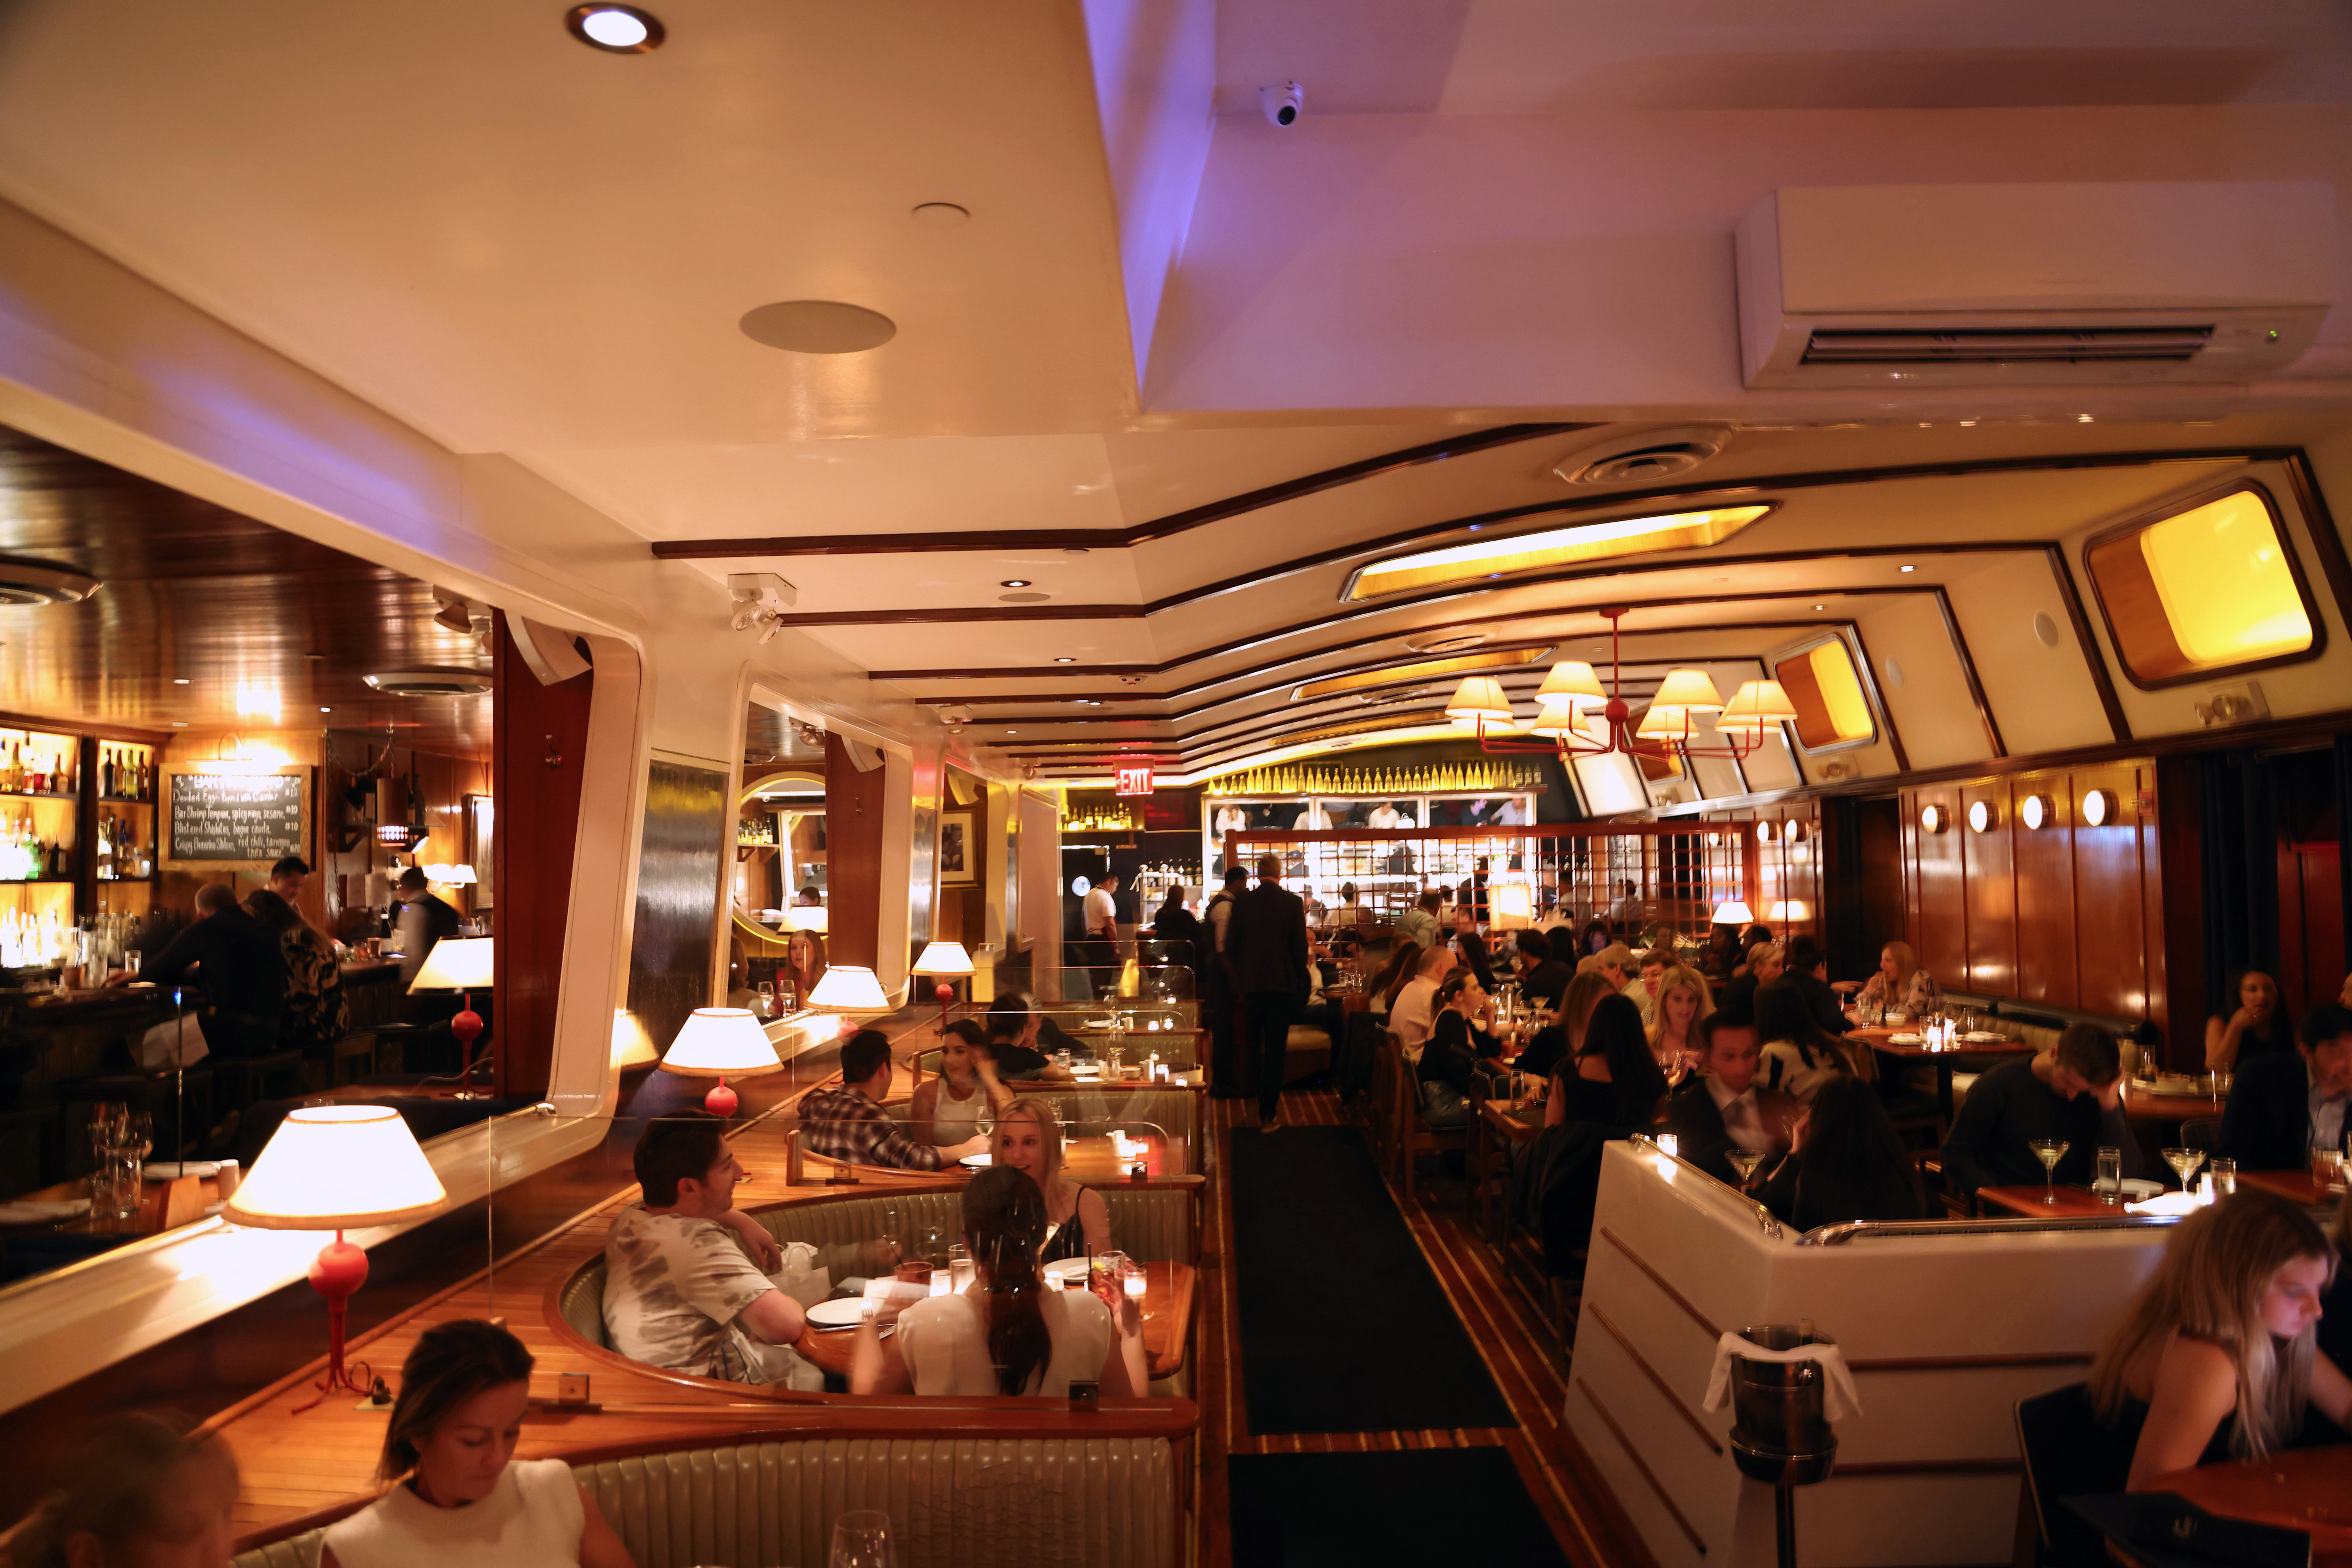 The interior of a restaurant full of people looks like the inside of a boat.